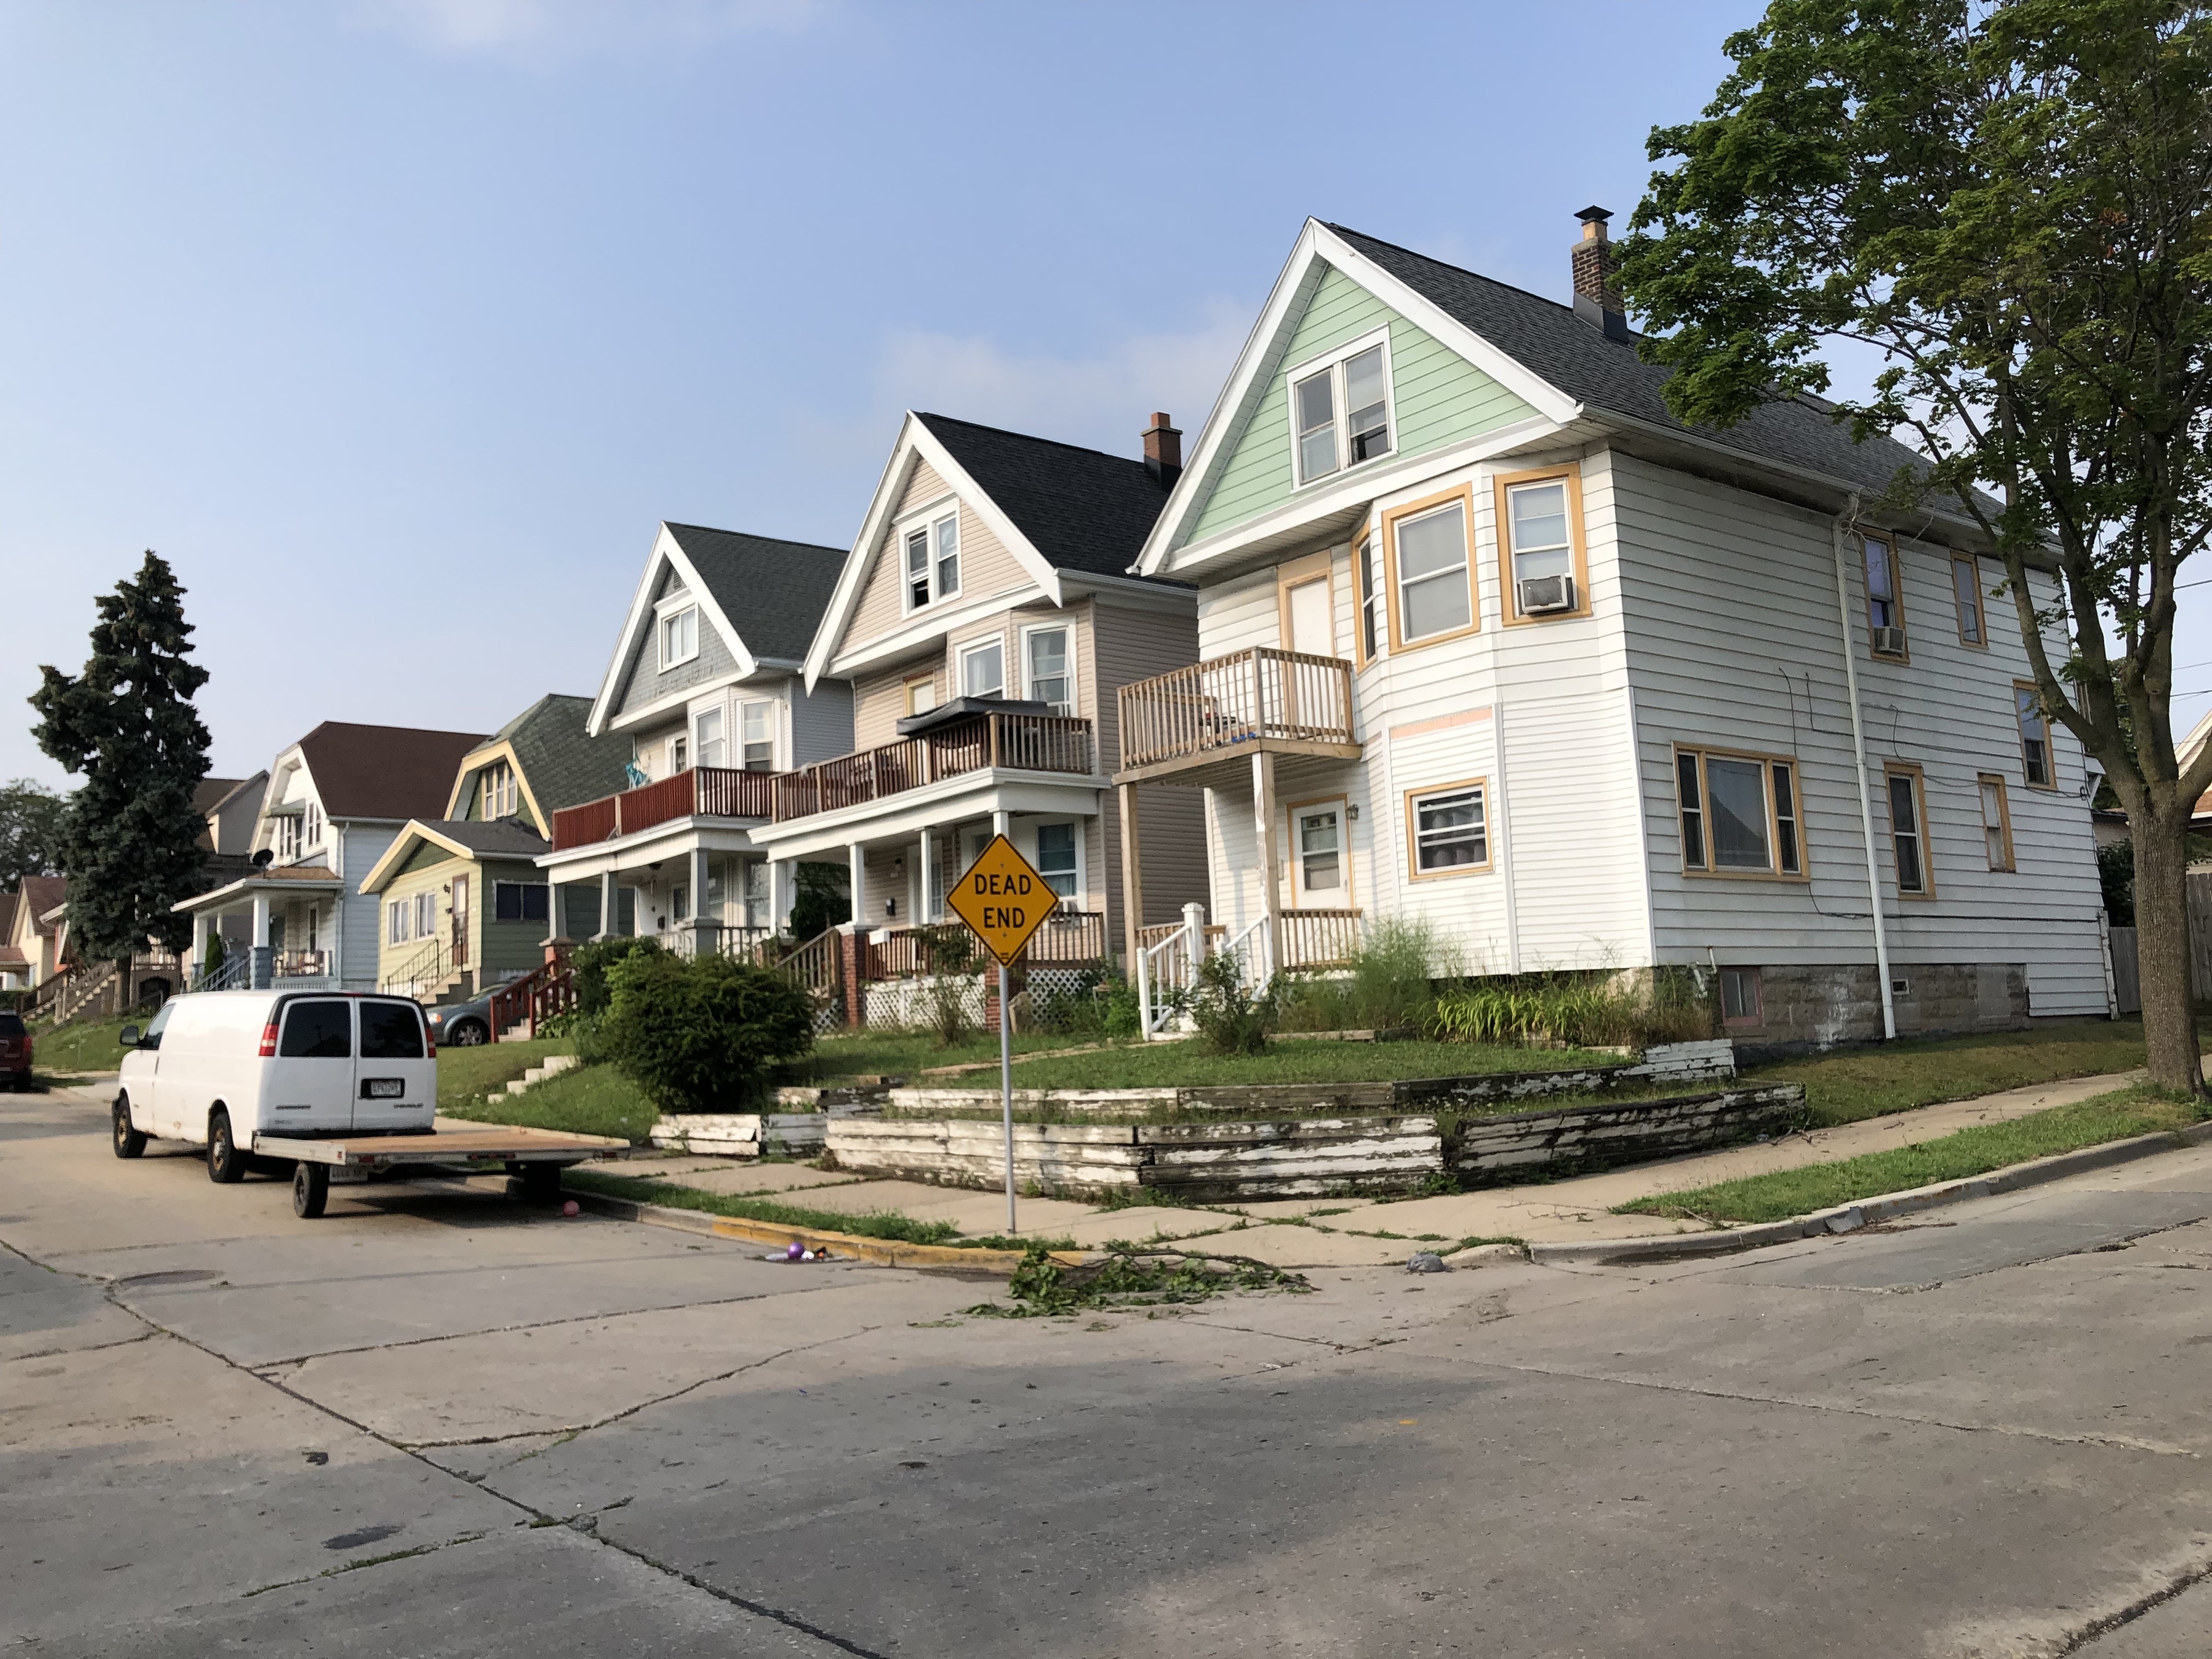 Houses along S. 15th Pl. in the Polonia neighborhood. Photo by Jeramey Jannene.